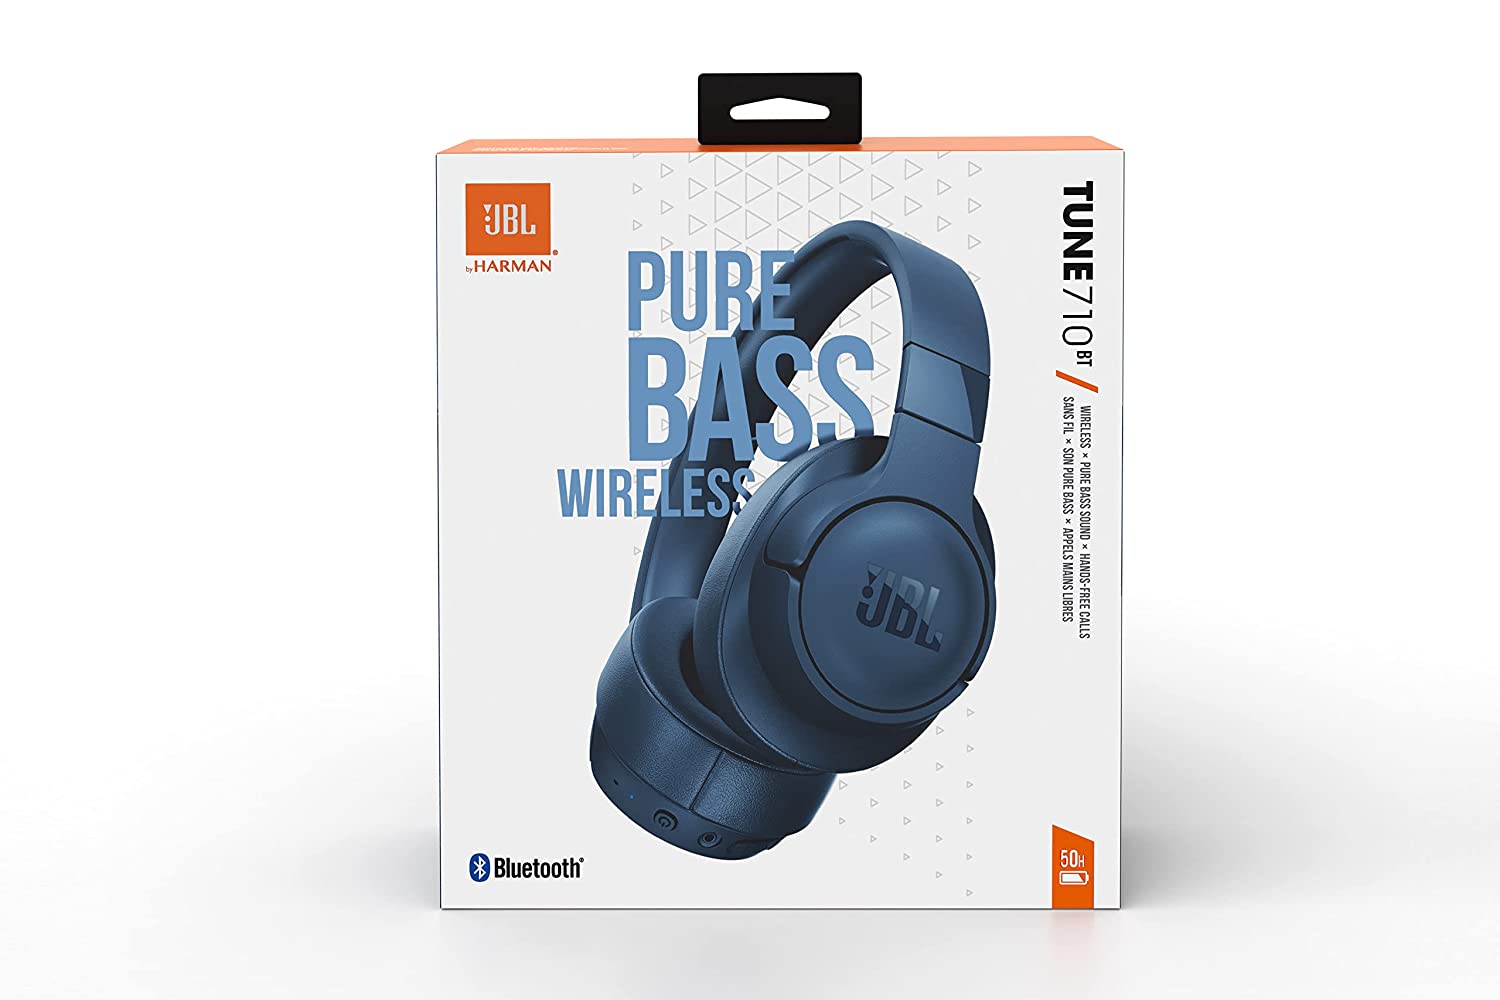 JBL Tune 710BT Wireless Over-Ear Headphones with Built-in Microphone